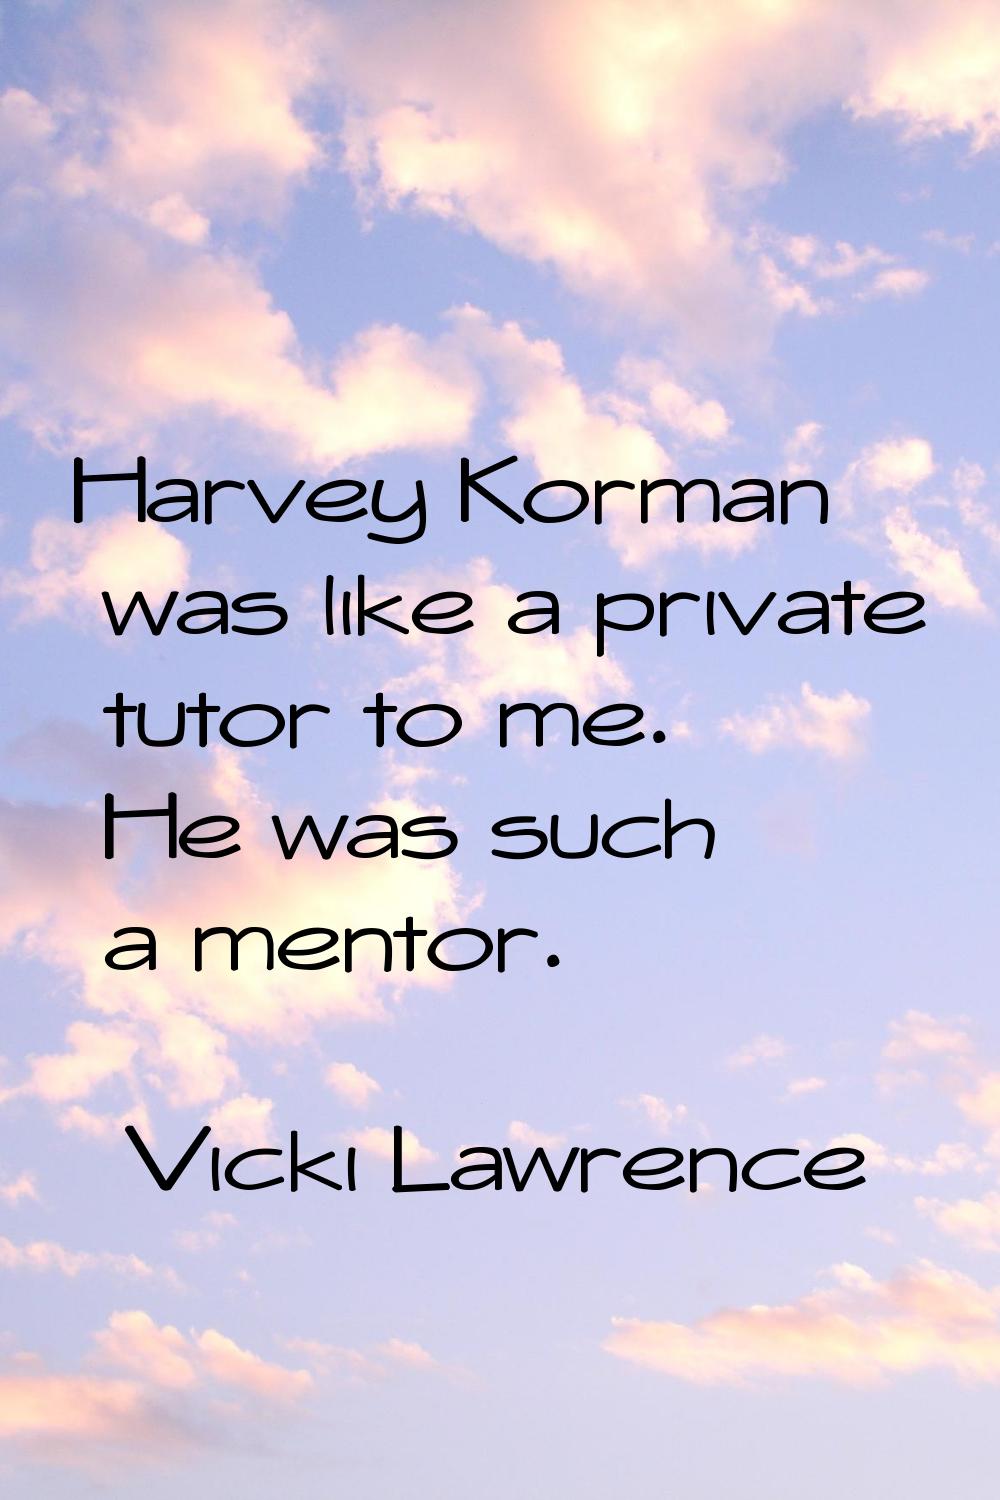 Harvey Korman was like a private tutor to me. He was such a mentor.